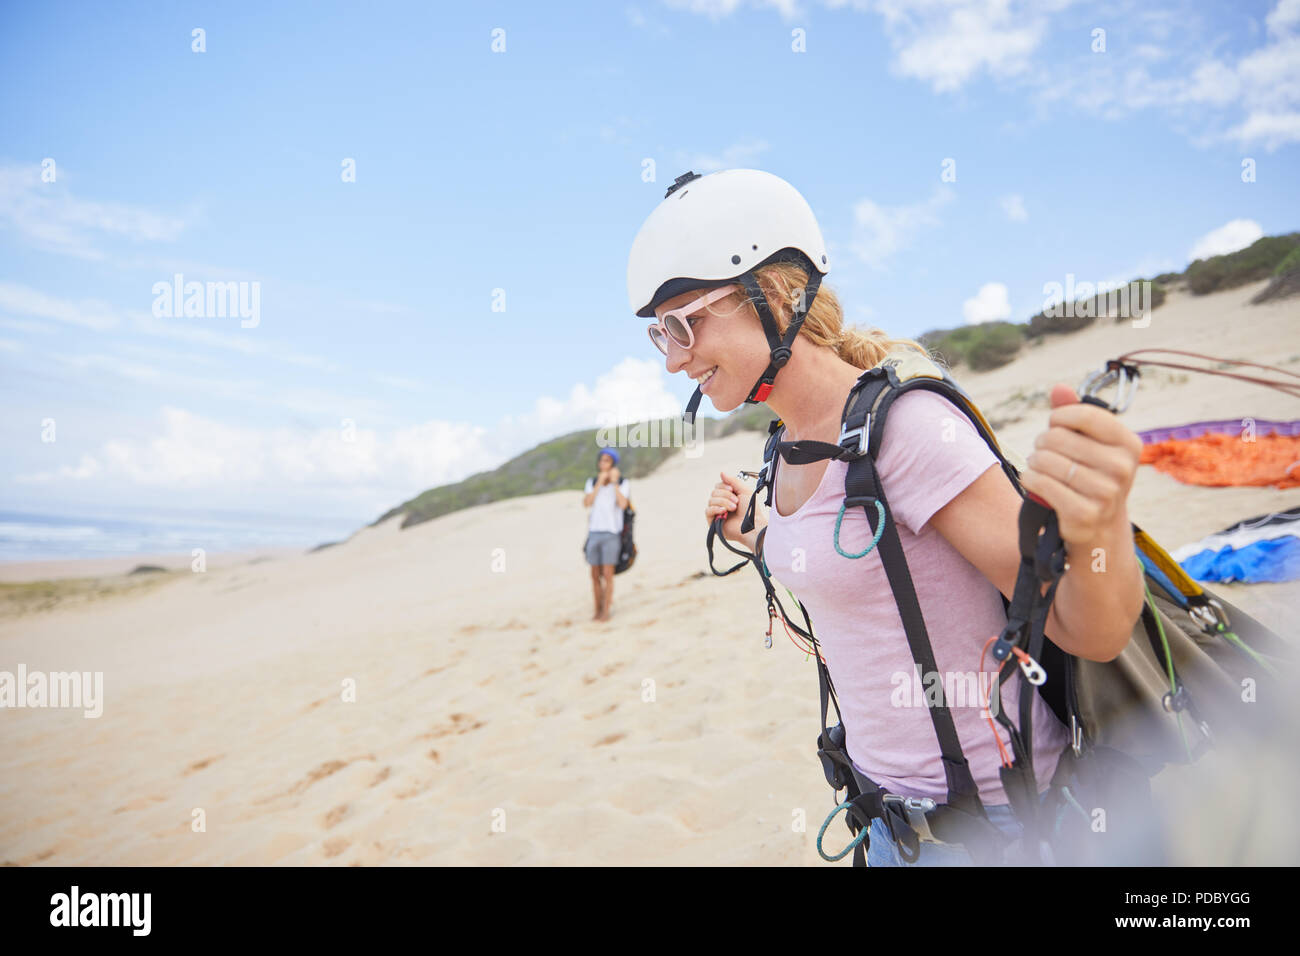 Smiling female paraglider with equipment on beach Stock Photo